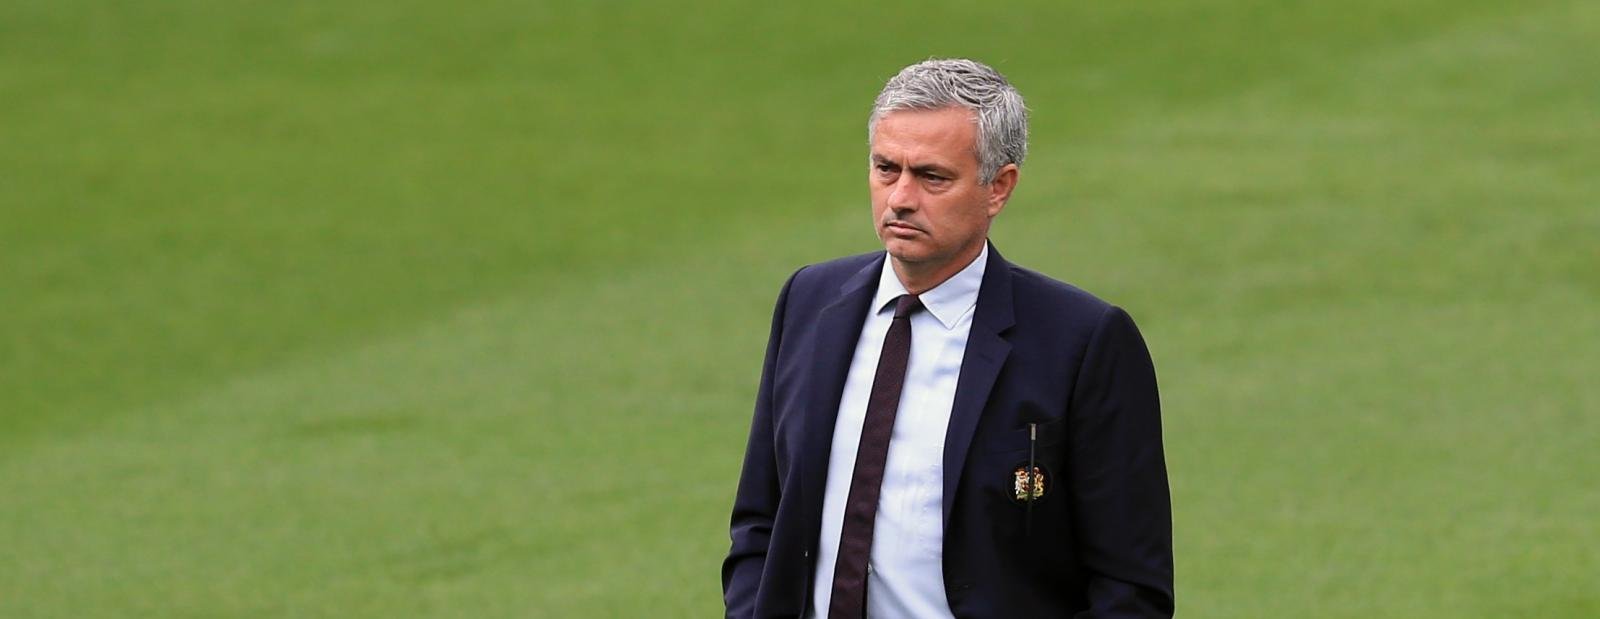 Mourinho overhaul continues as Man United target £70m double swoop in January